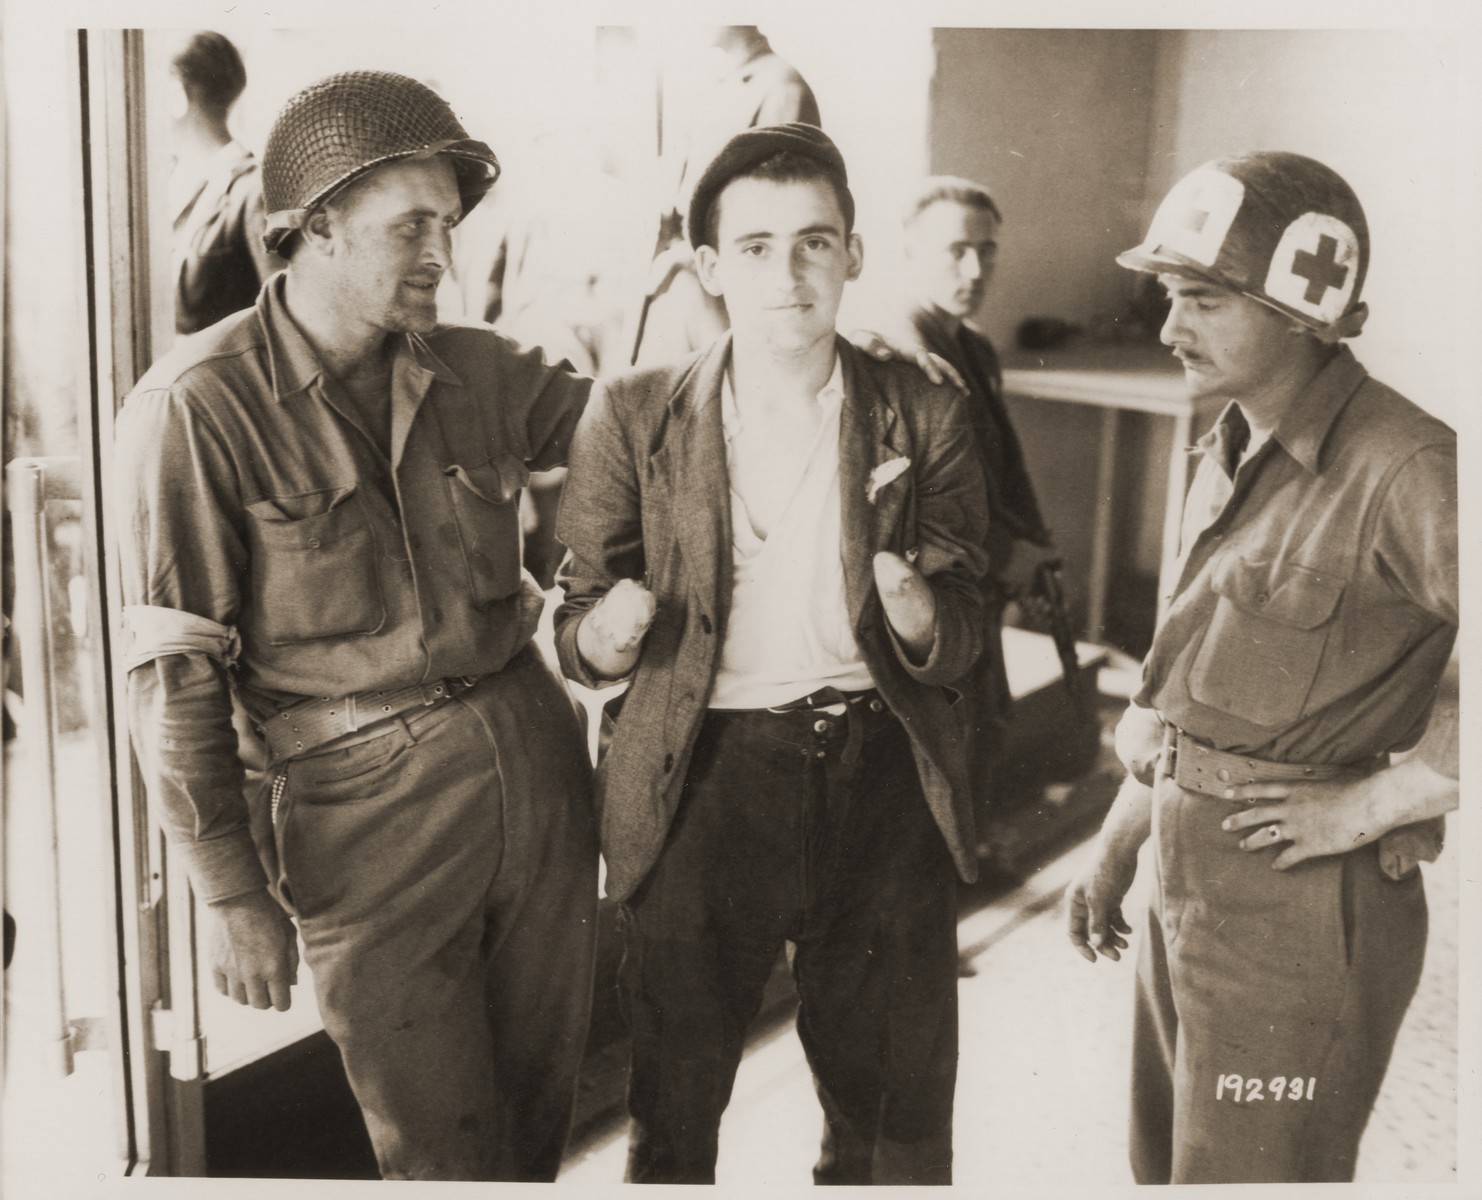 A French resistance fighter, whose hands were cut off by Germans, receives medical attention from U.S. Army medics.